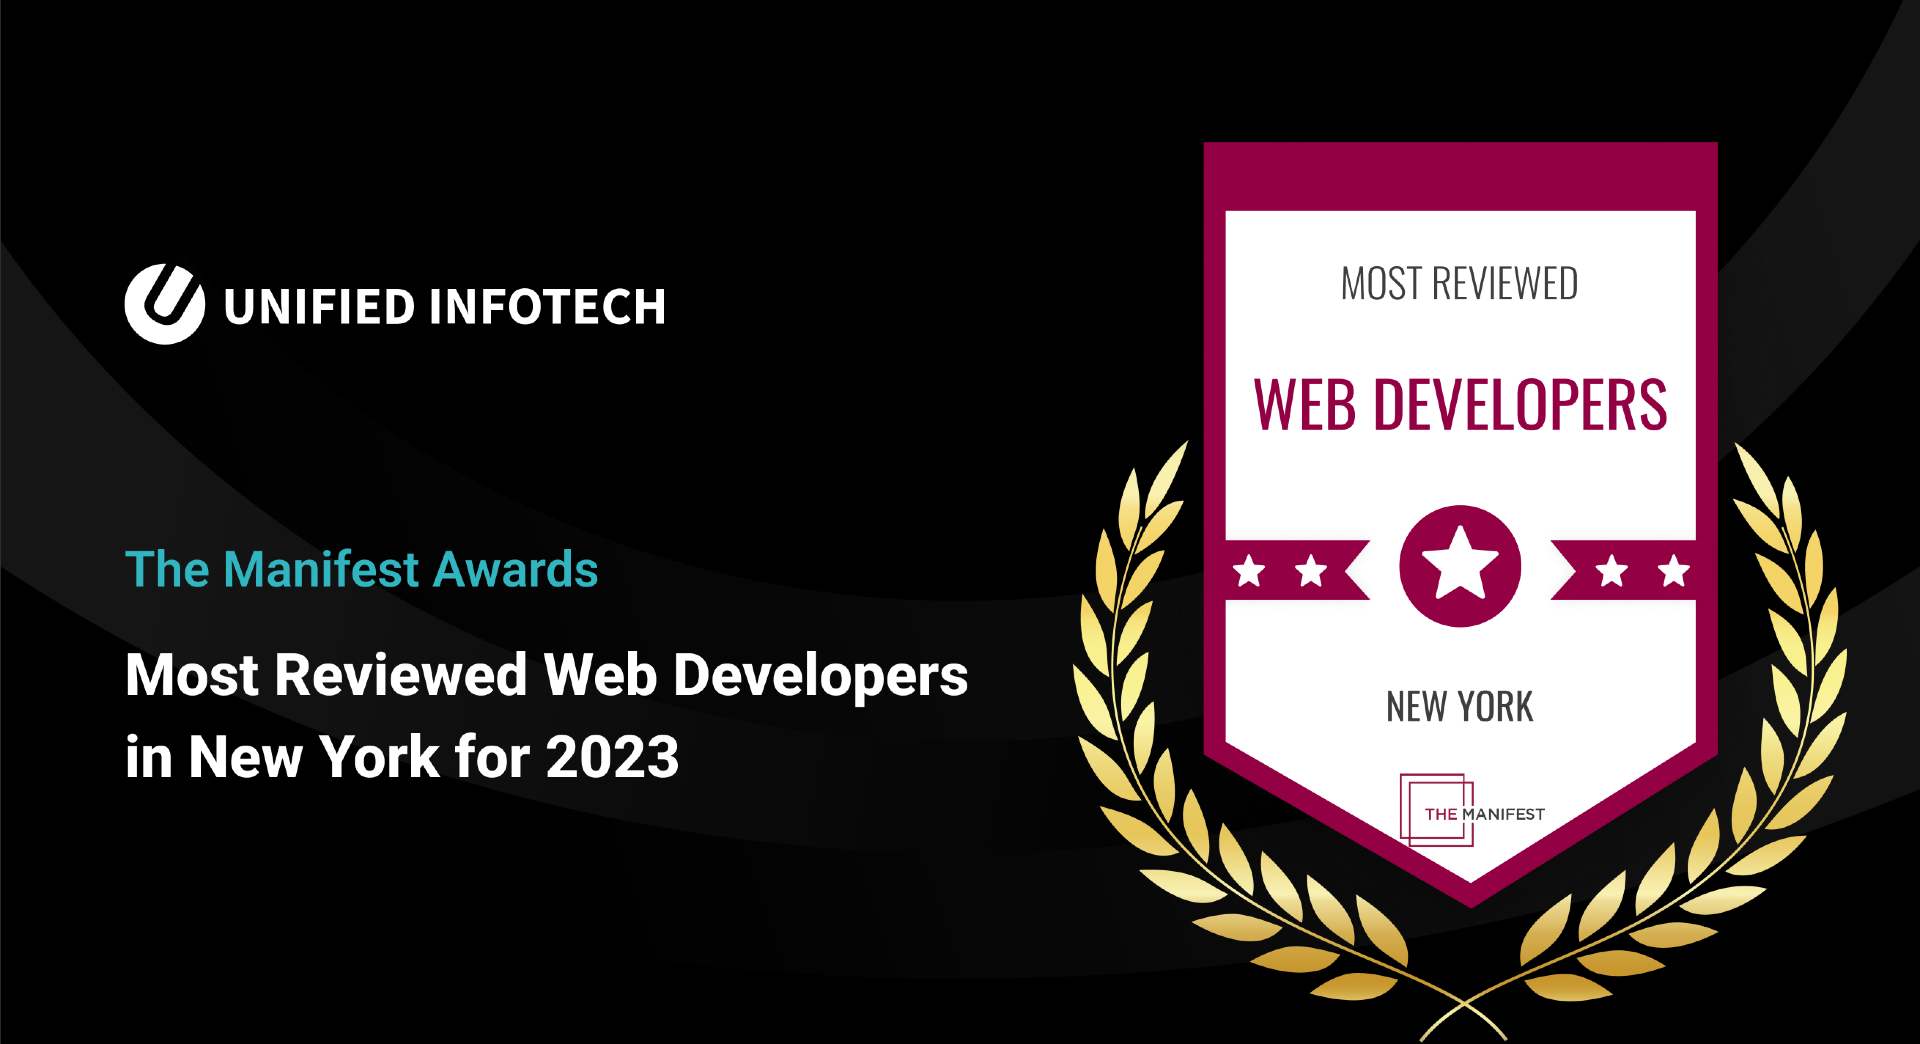 The Manifest Names Unified Infotech as one of the Most Reviewed Web Developers in New York